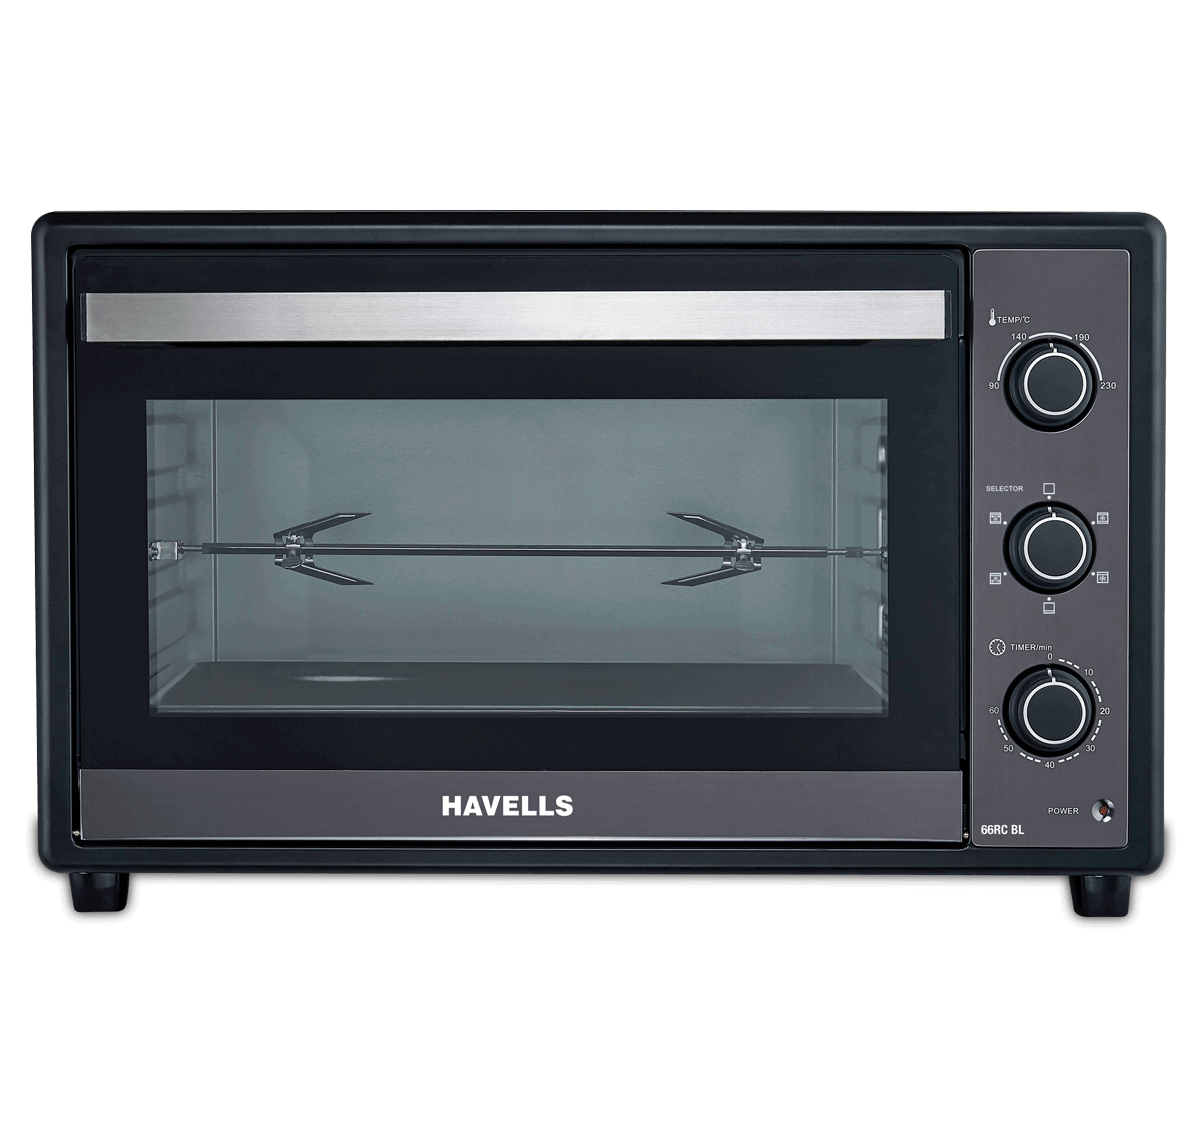 Havells OTG 66RC BL 2200W - Oven Toaster Griller | Buy Online - Havell,New Delhi,Electronics & Home Appliances,Kitchen & Other Appliances,77traders